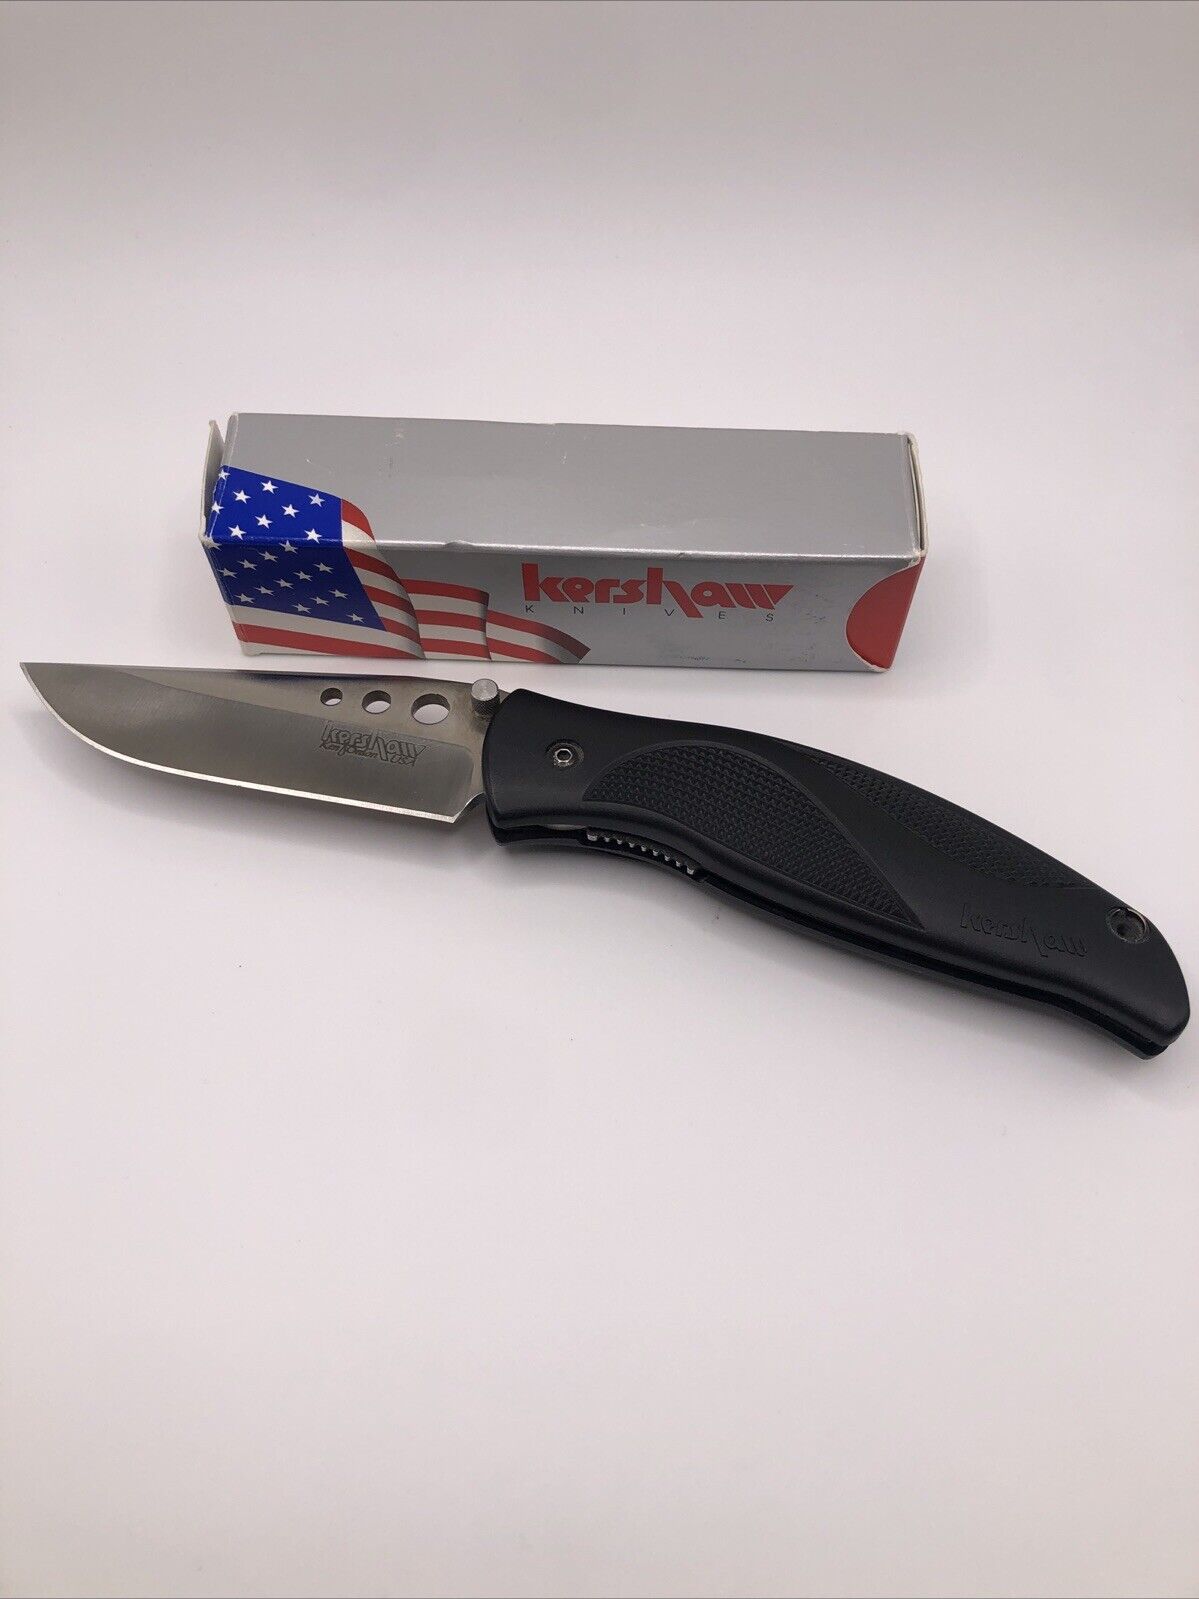 Kershaw Whirlwind 1560 Ken Onion USA Assisted Open Knife Discontinued - 13-11